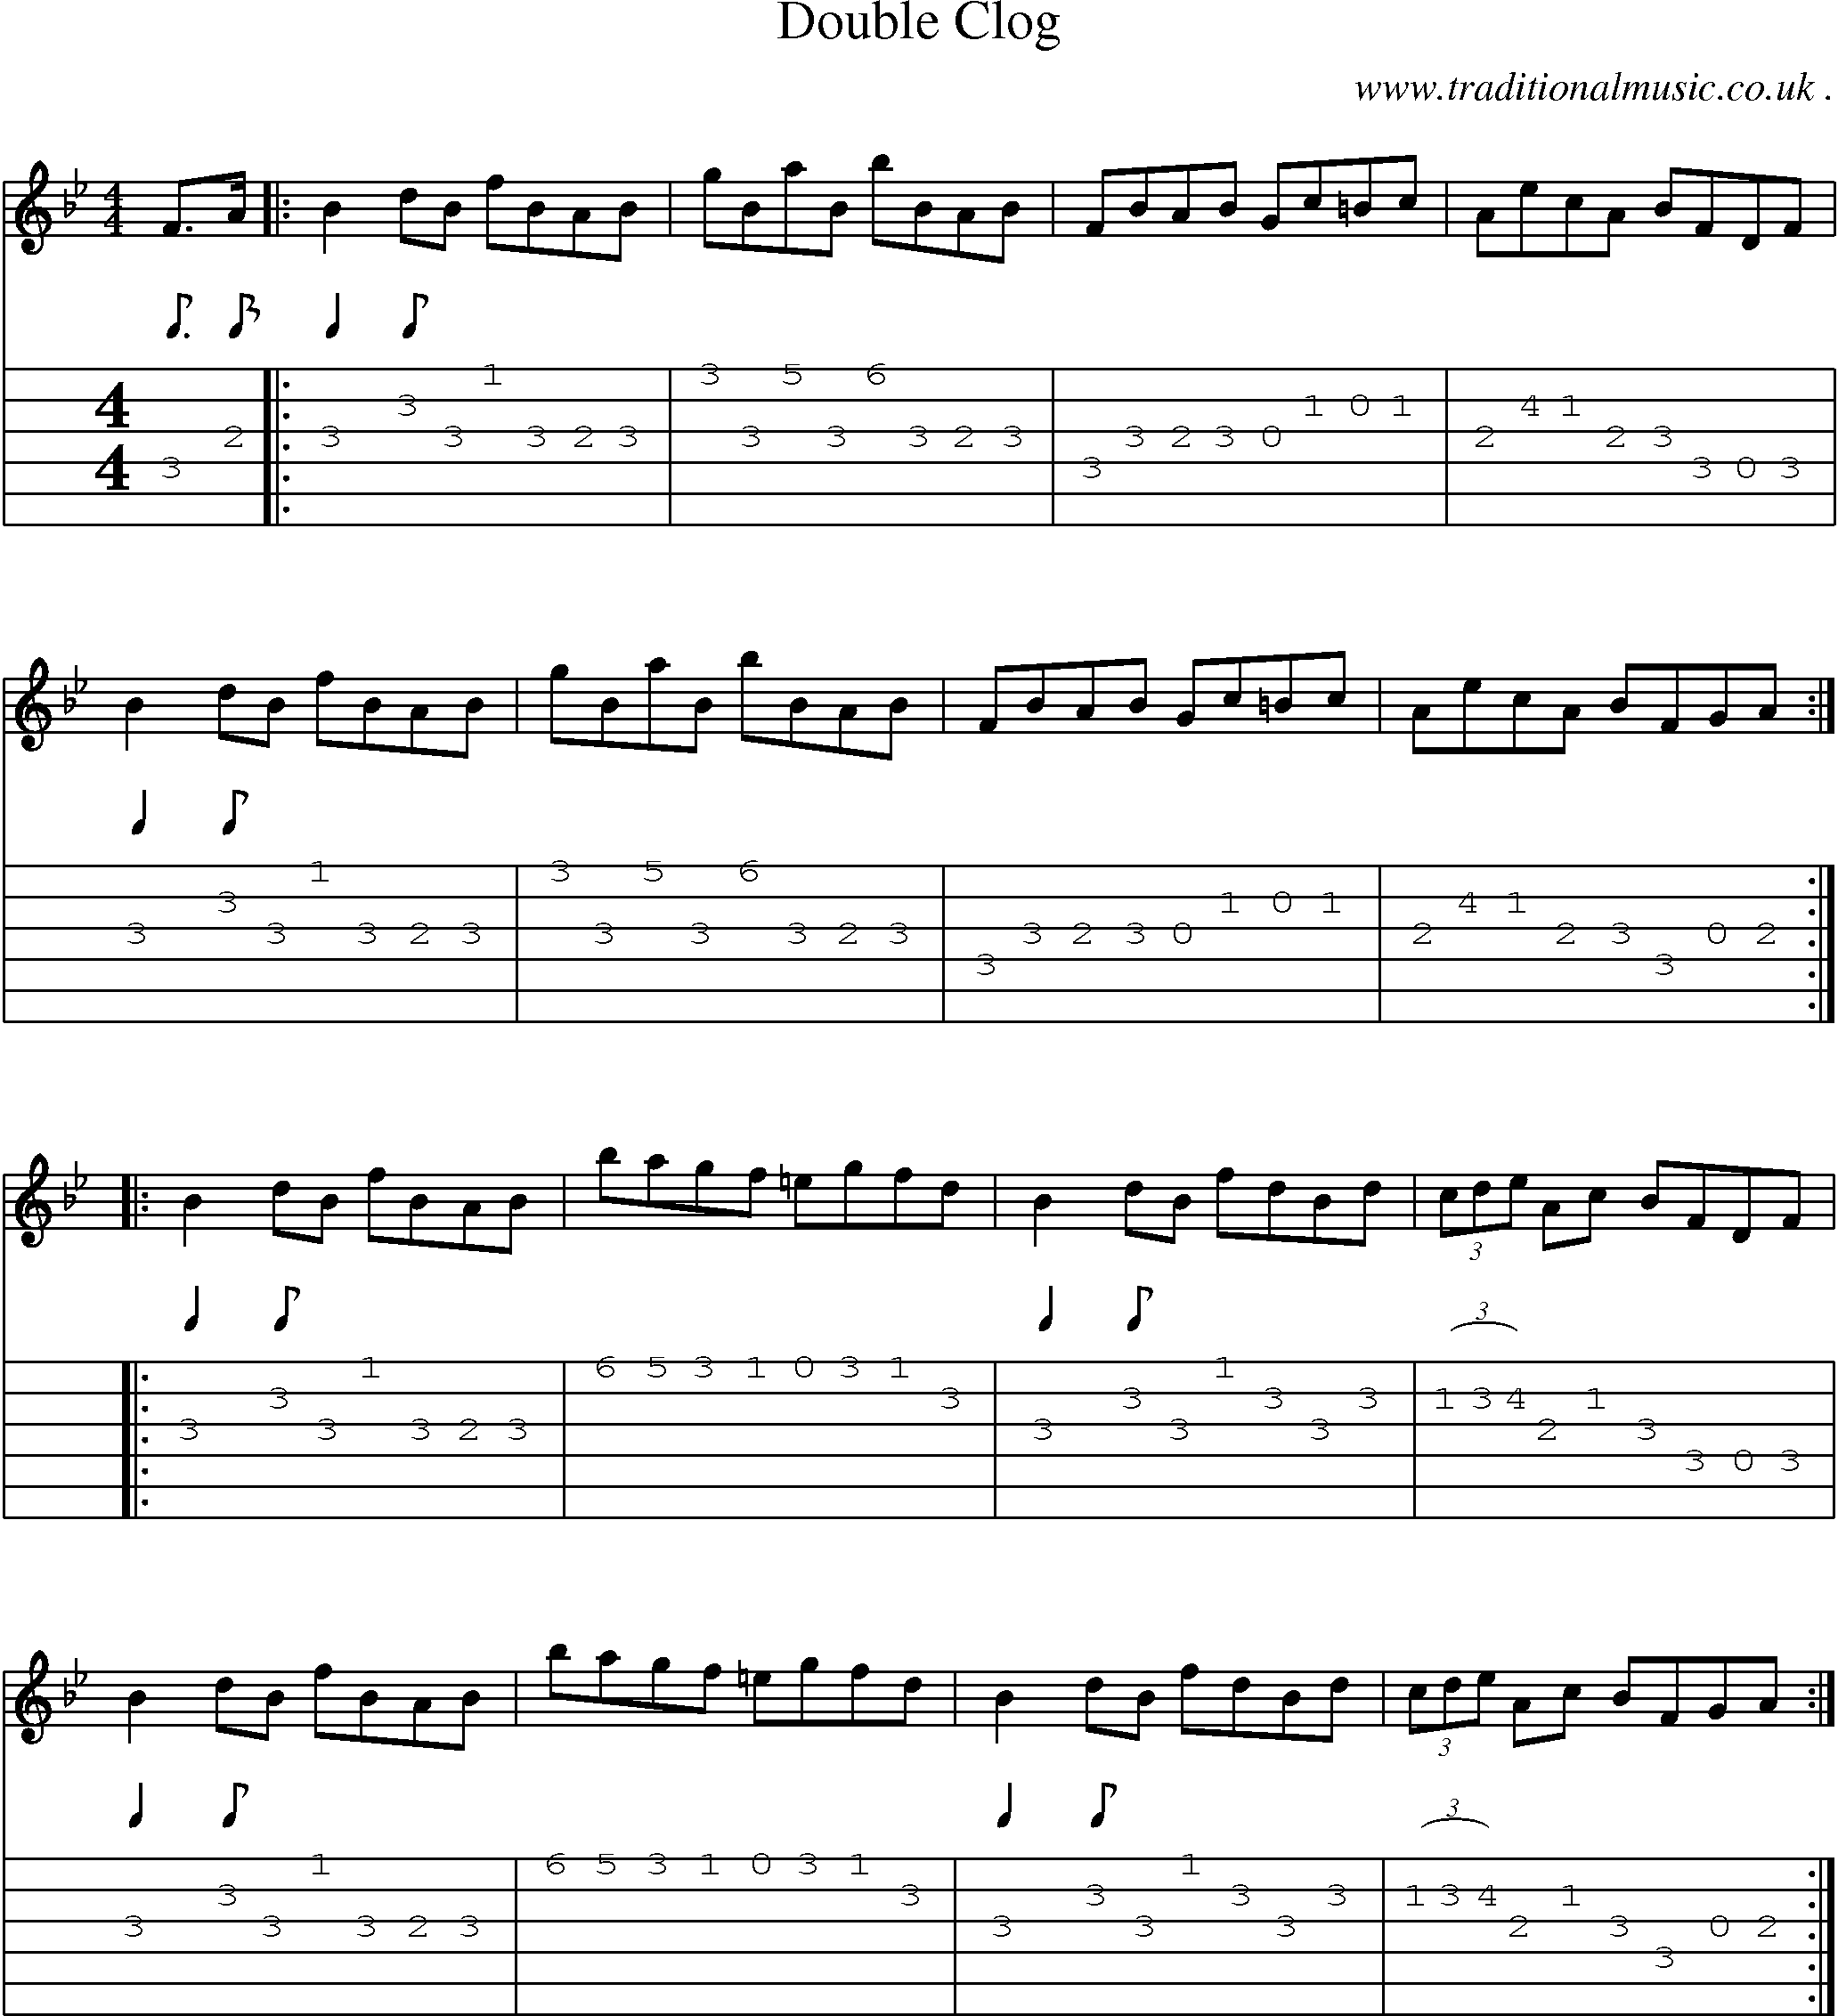 Sheet-Music and Guitar Tabs for Double Clog